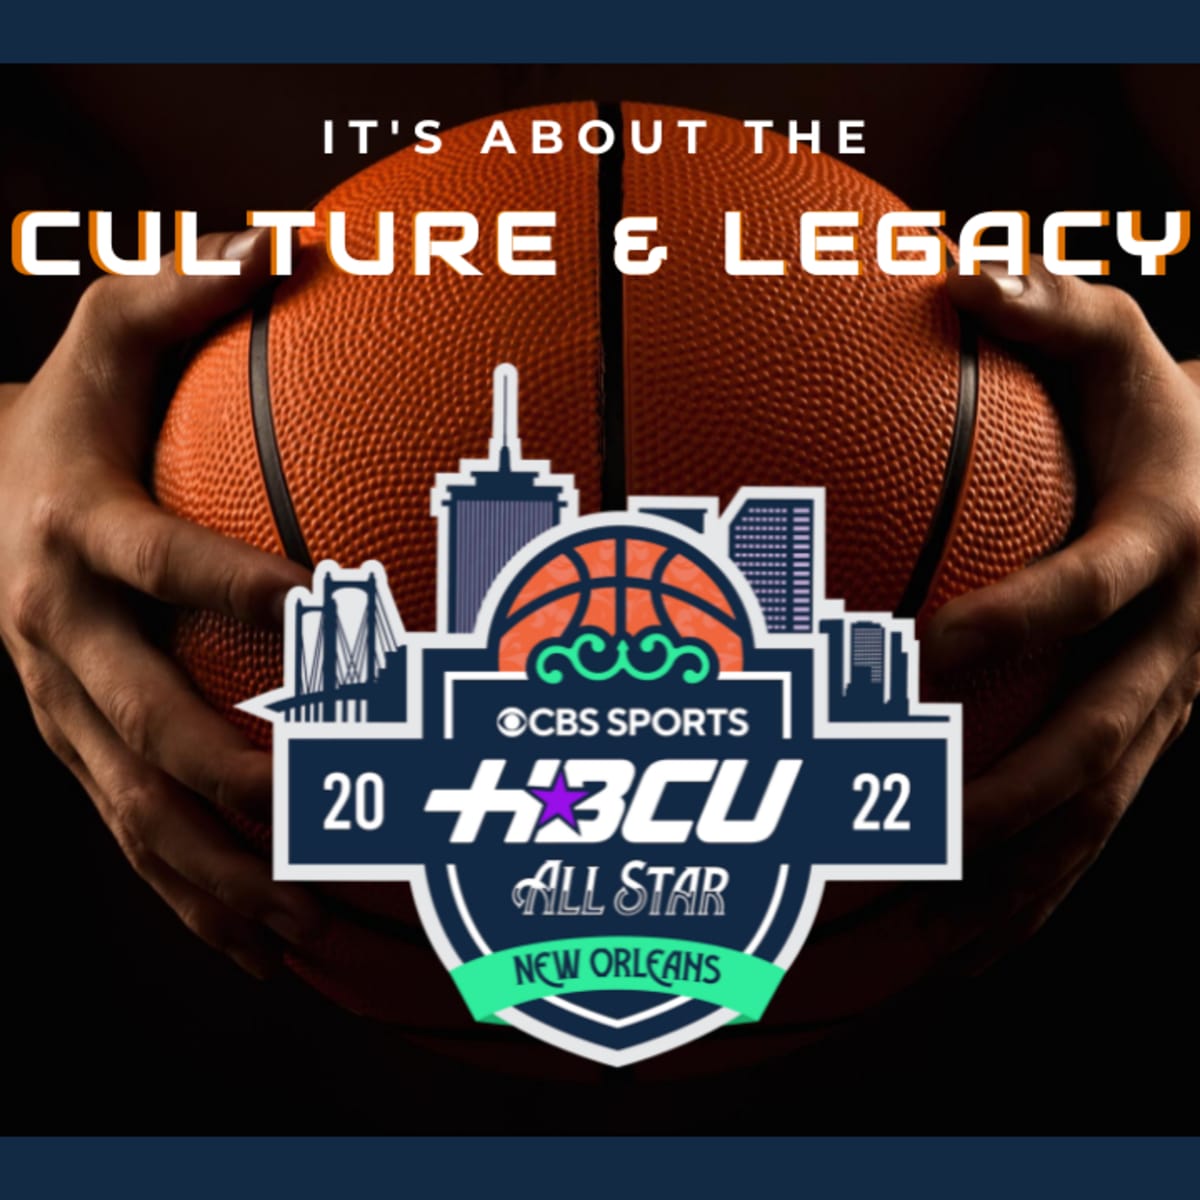 HBCU All-Star Game is about 'The Culture and Legacy' - HBCU Legends